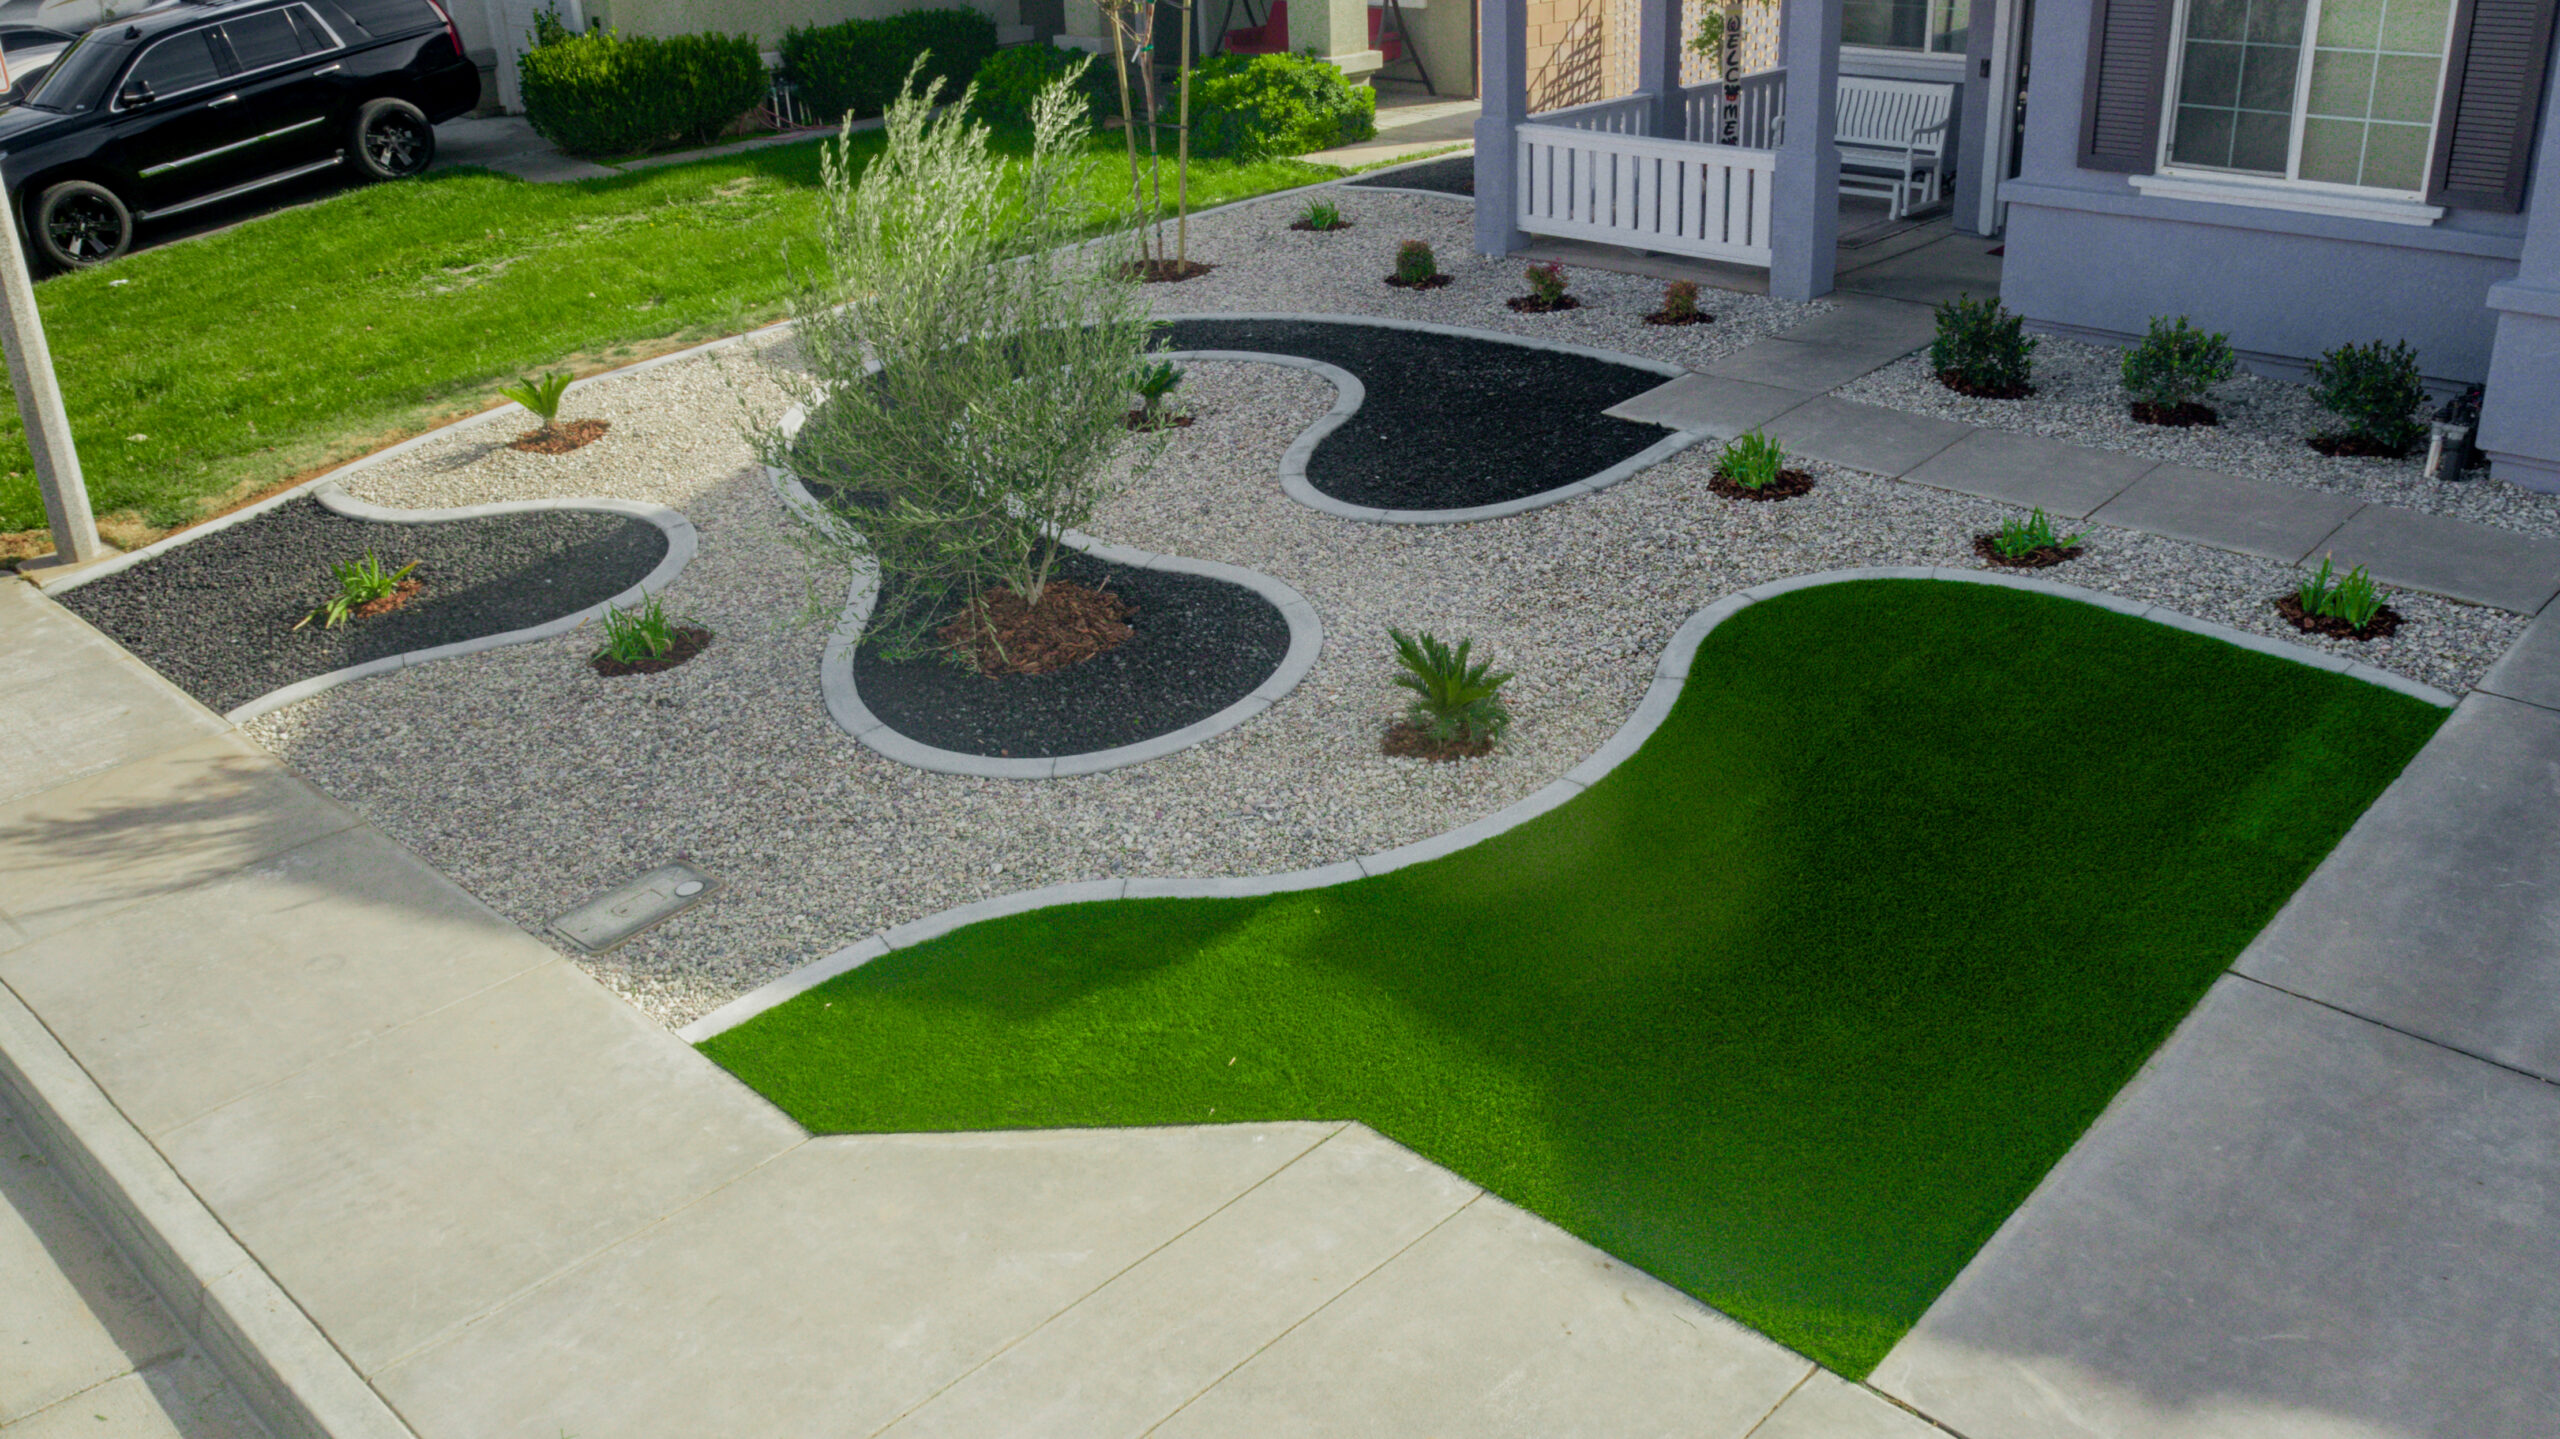 Photo of a landscaped backyard showing concrete work.